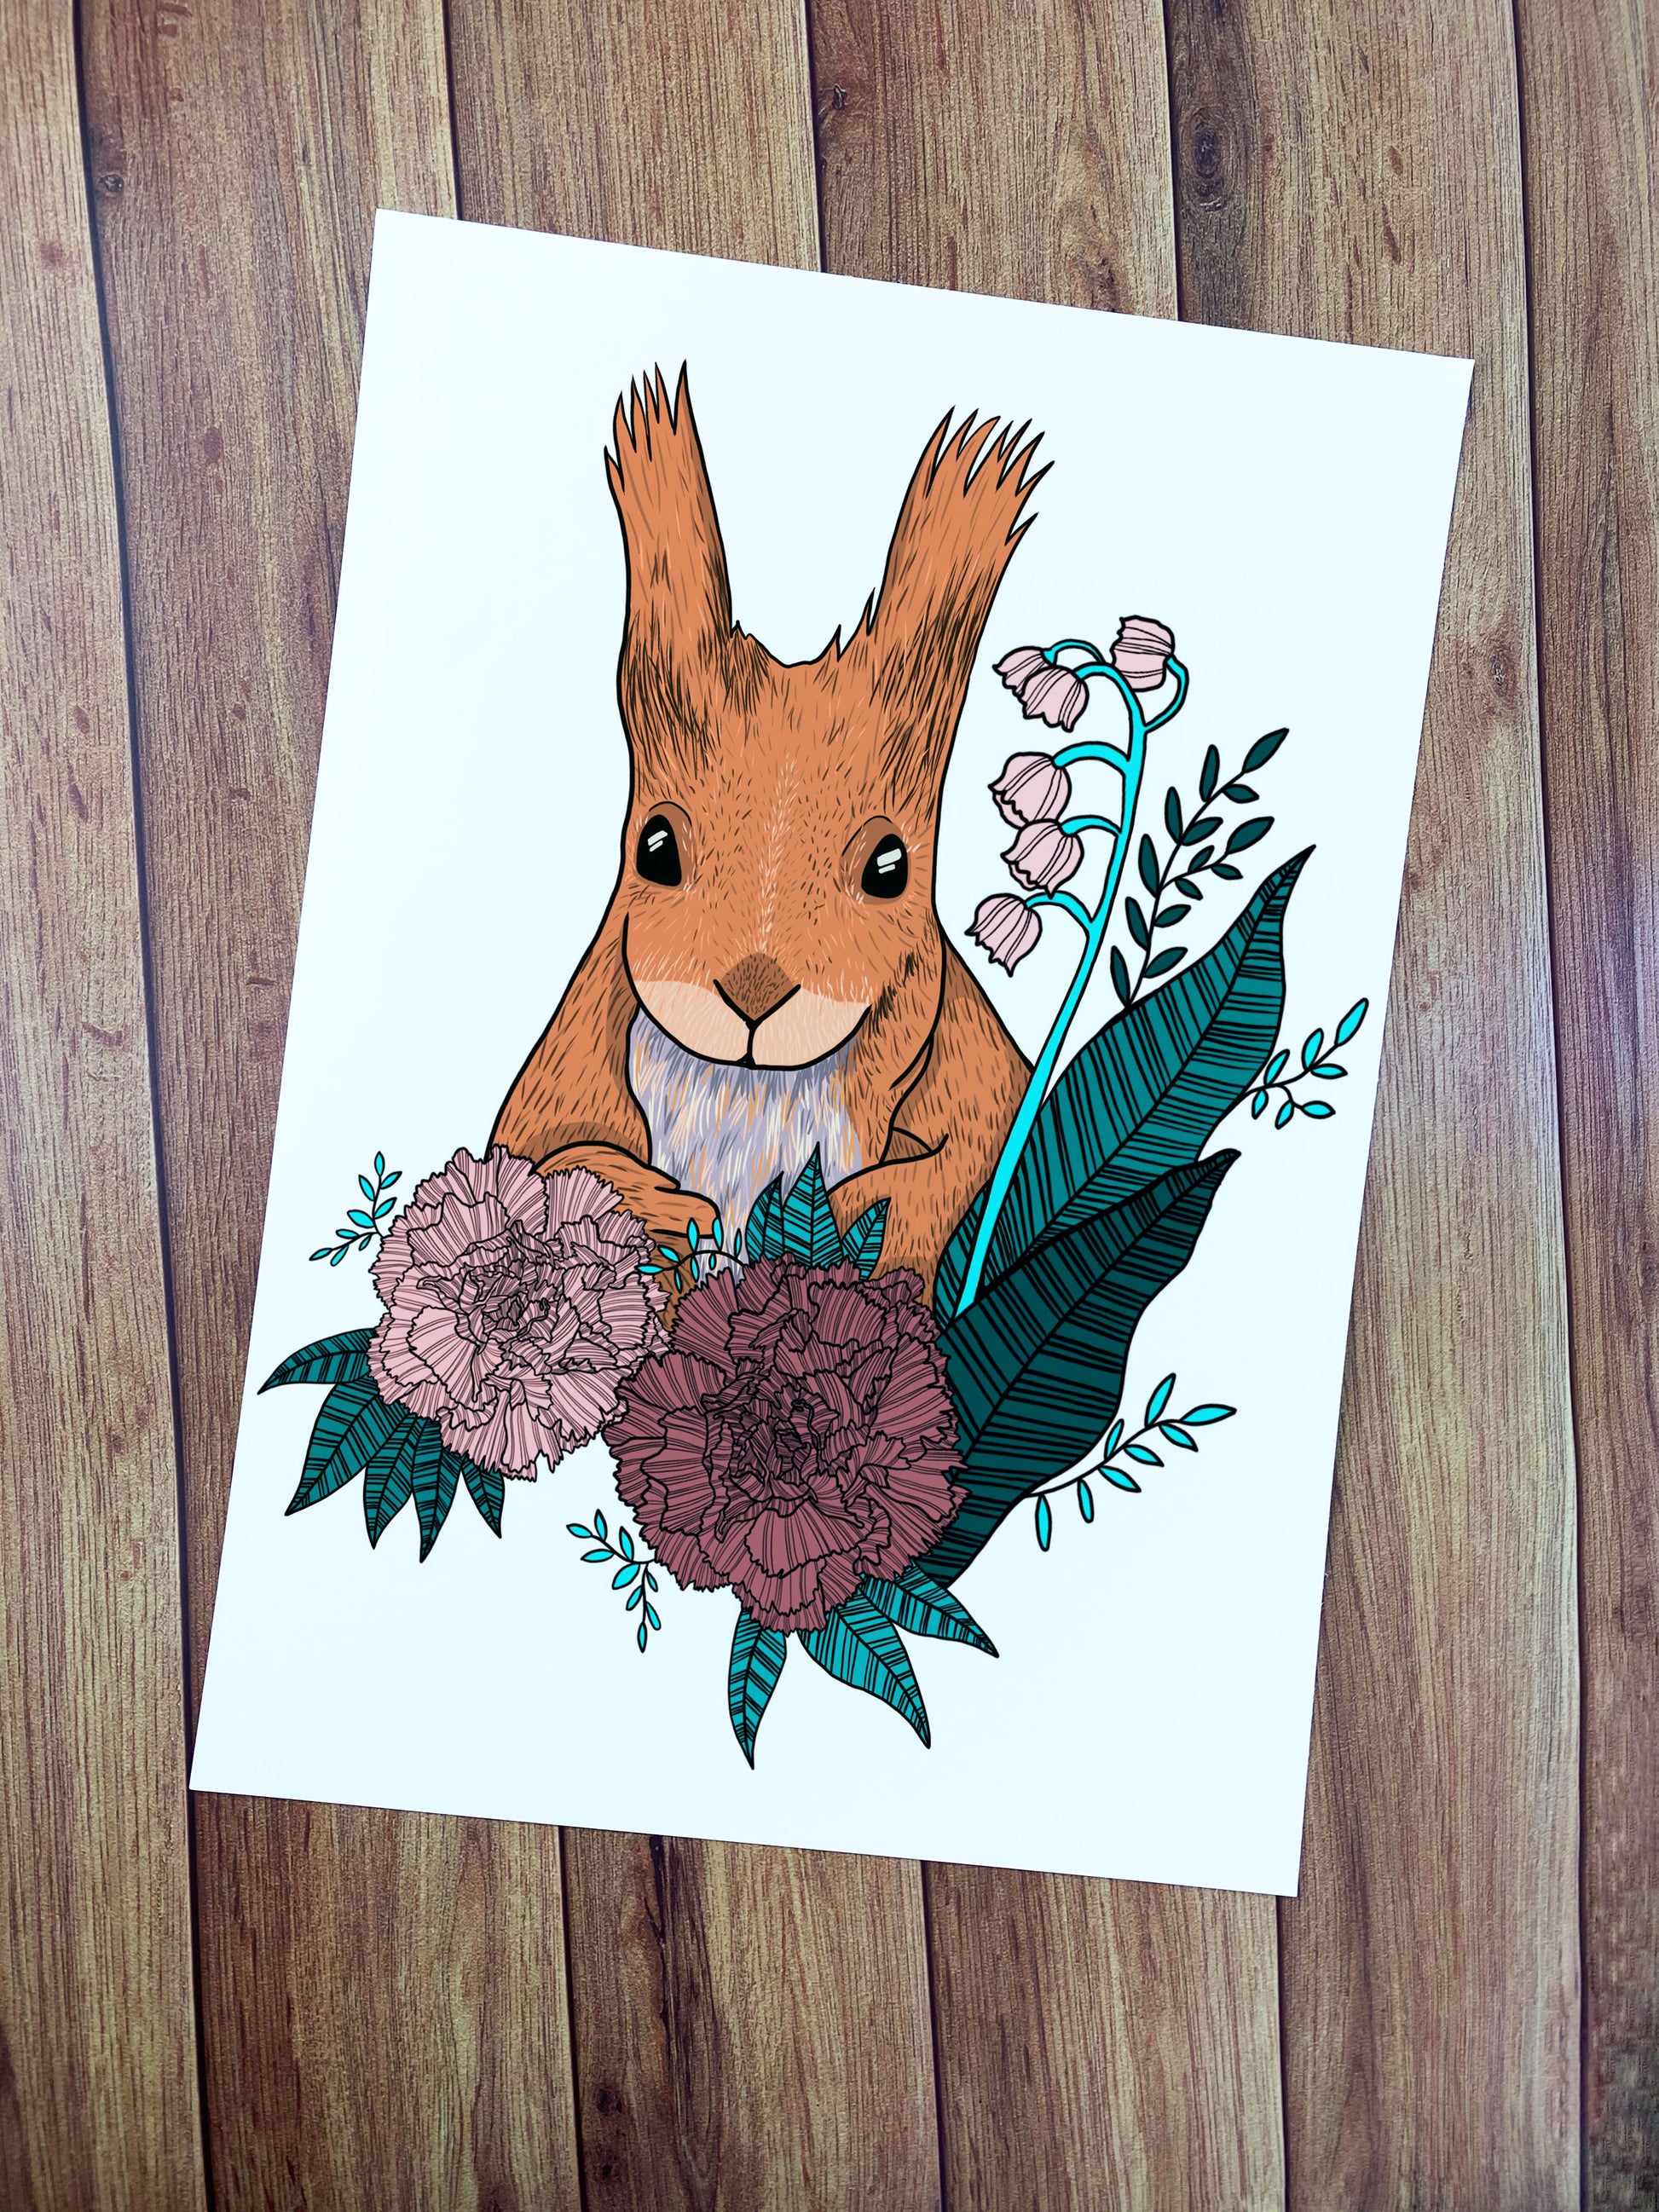 Art print against a wooden background with a red squirrel illustration on it, the squirrel is drawn digitially and sat amongst flowers and leaves. An ideal gift for a red squirrel lover, or someone who cares about endangered species.